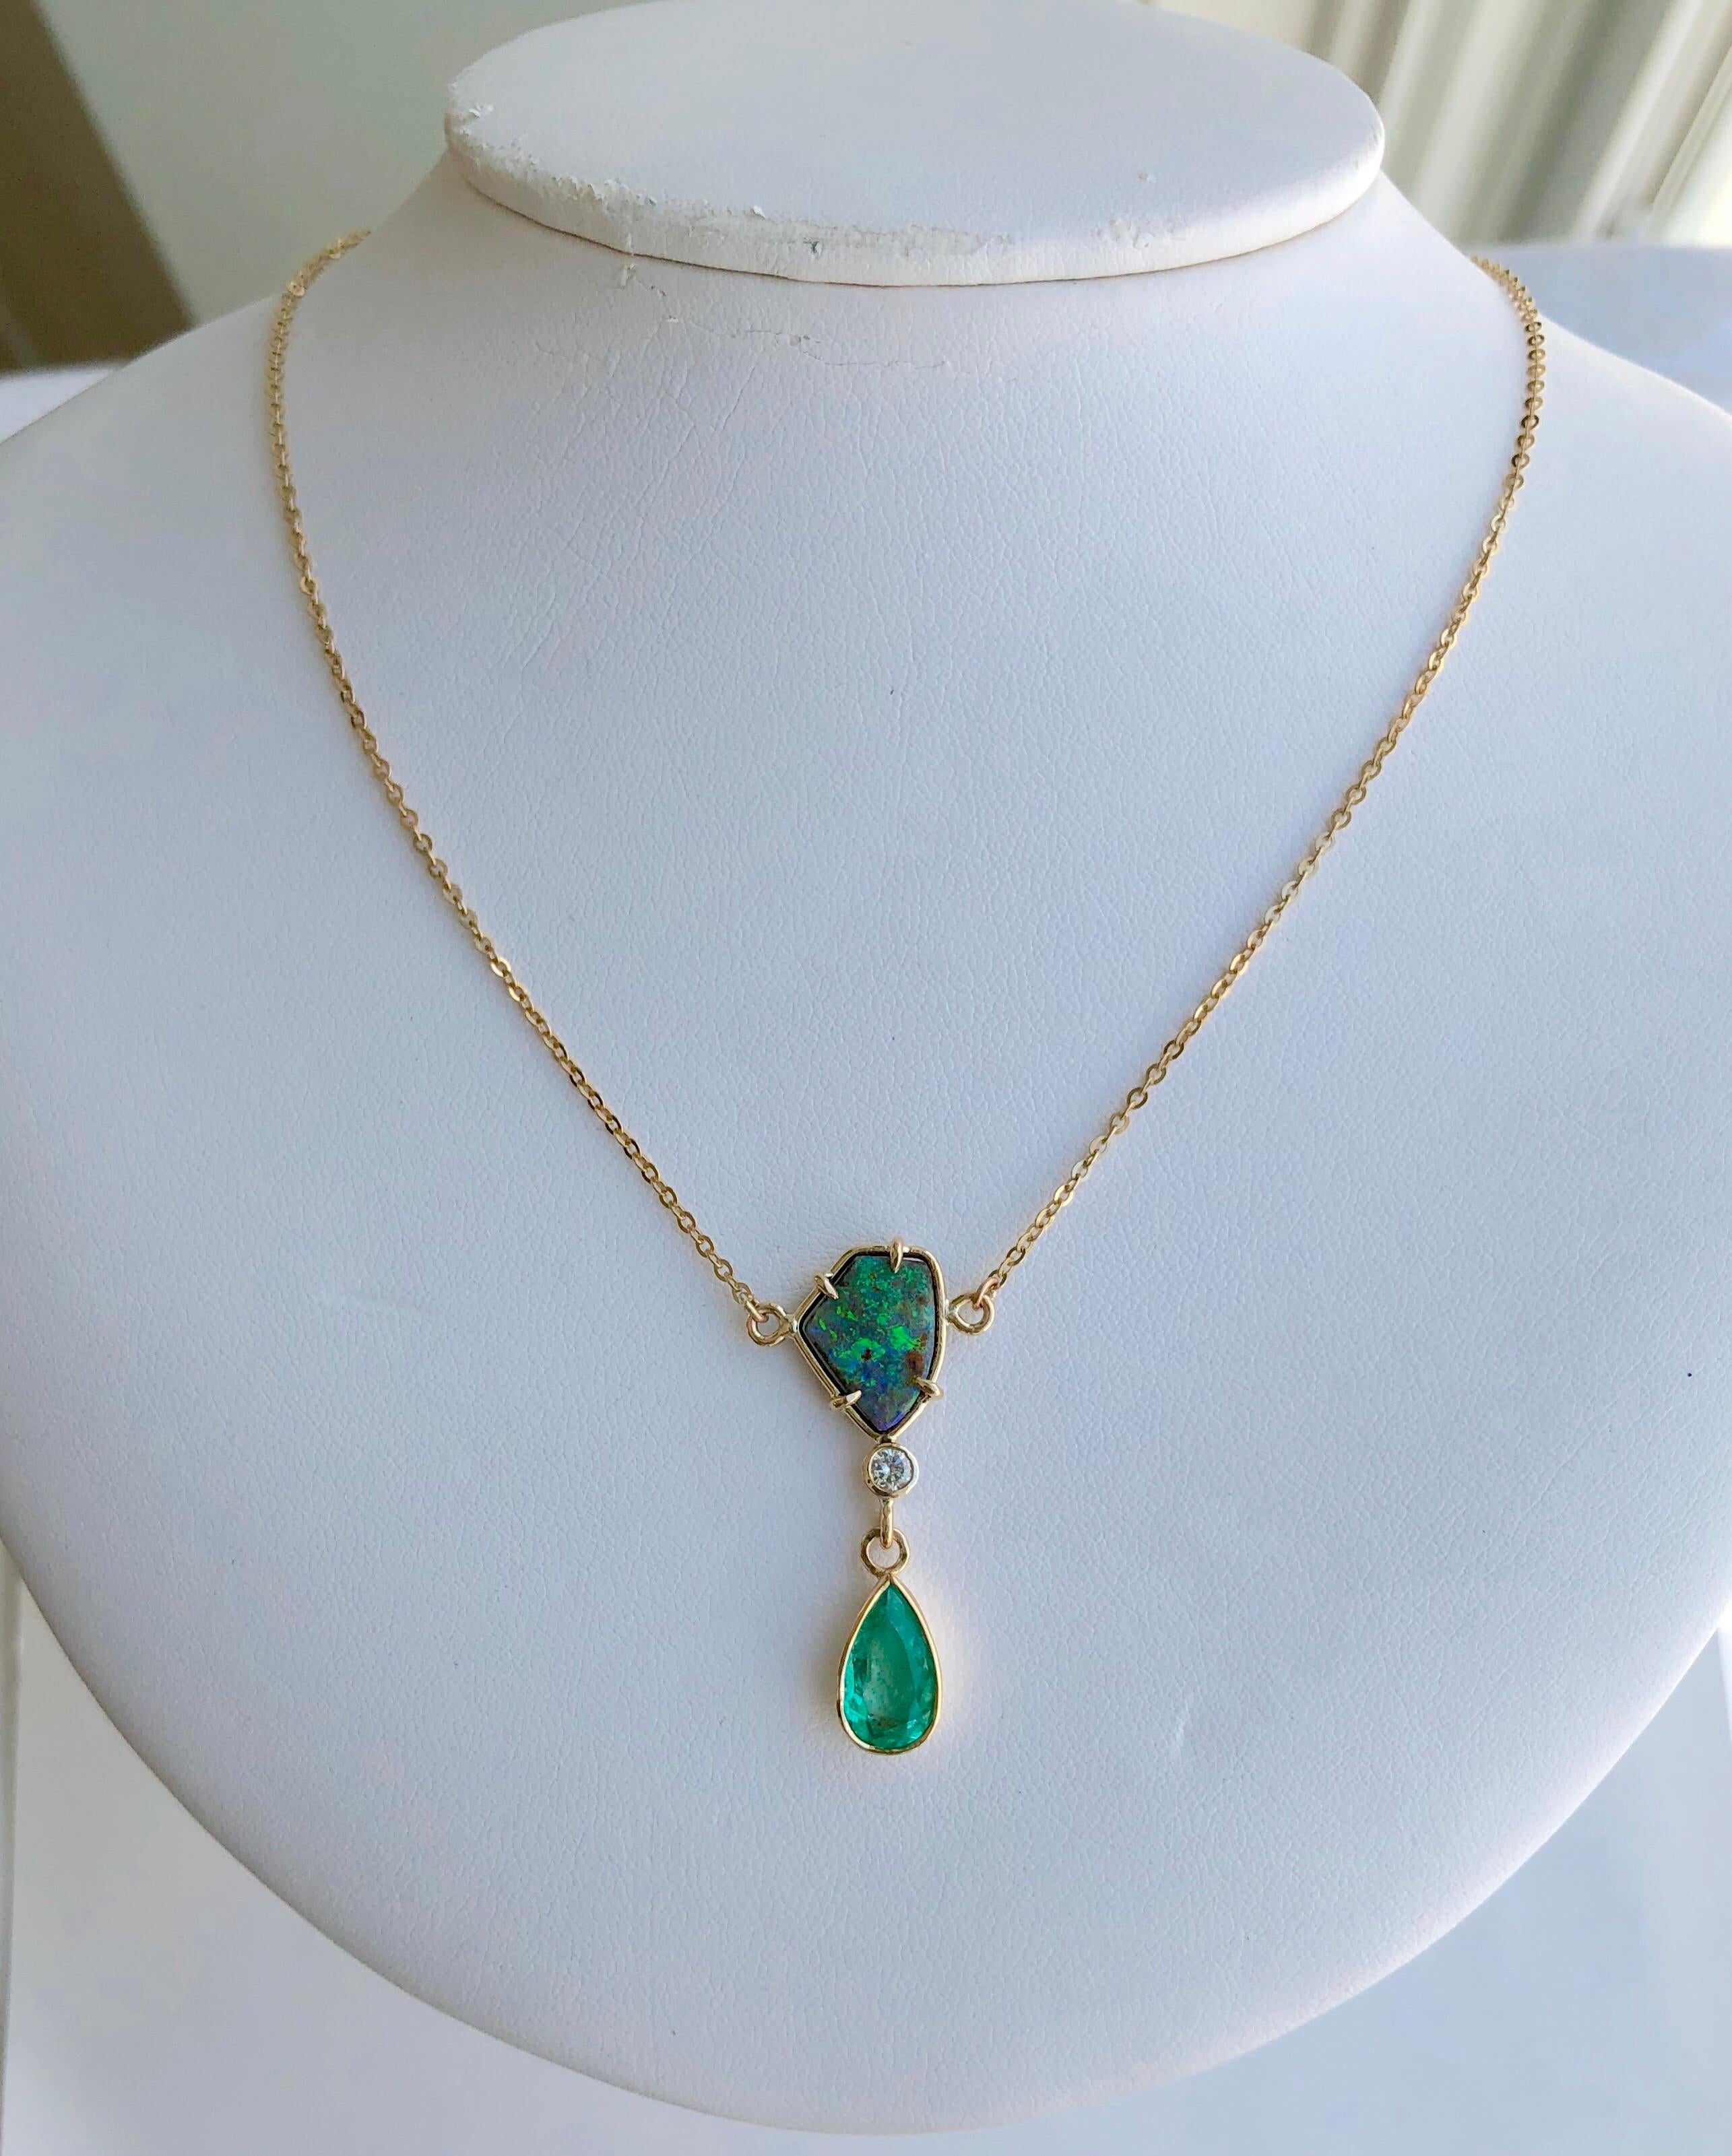 This stylish necklace featuring a gorgeous 1.50 carat natural Colombian emerald pear cut and a free form Australian boulder opal 3.50 carat with great play of colors. The pendant necklace also feature a round diamond approx 0.10cts. This beautiful